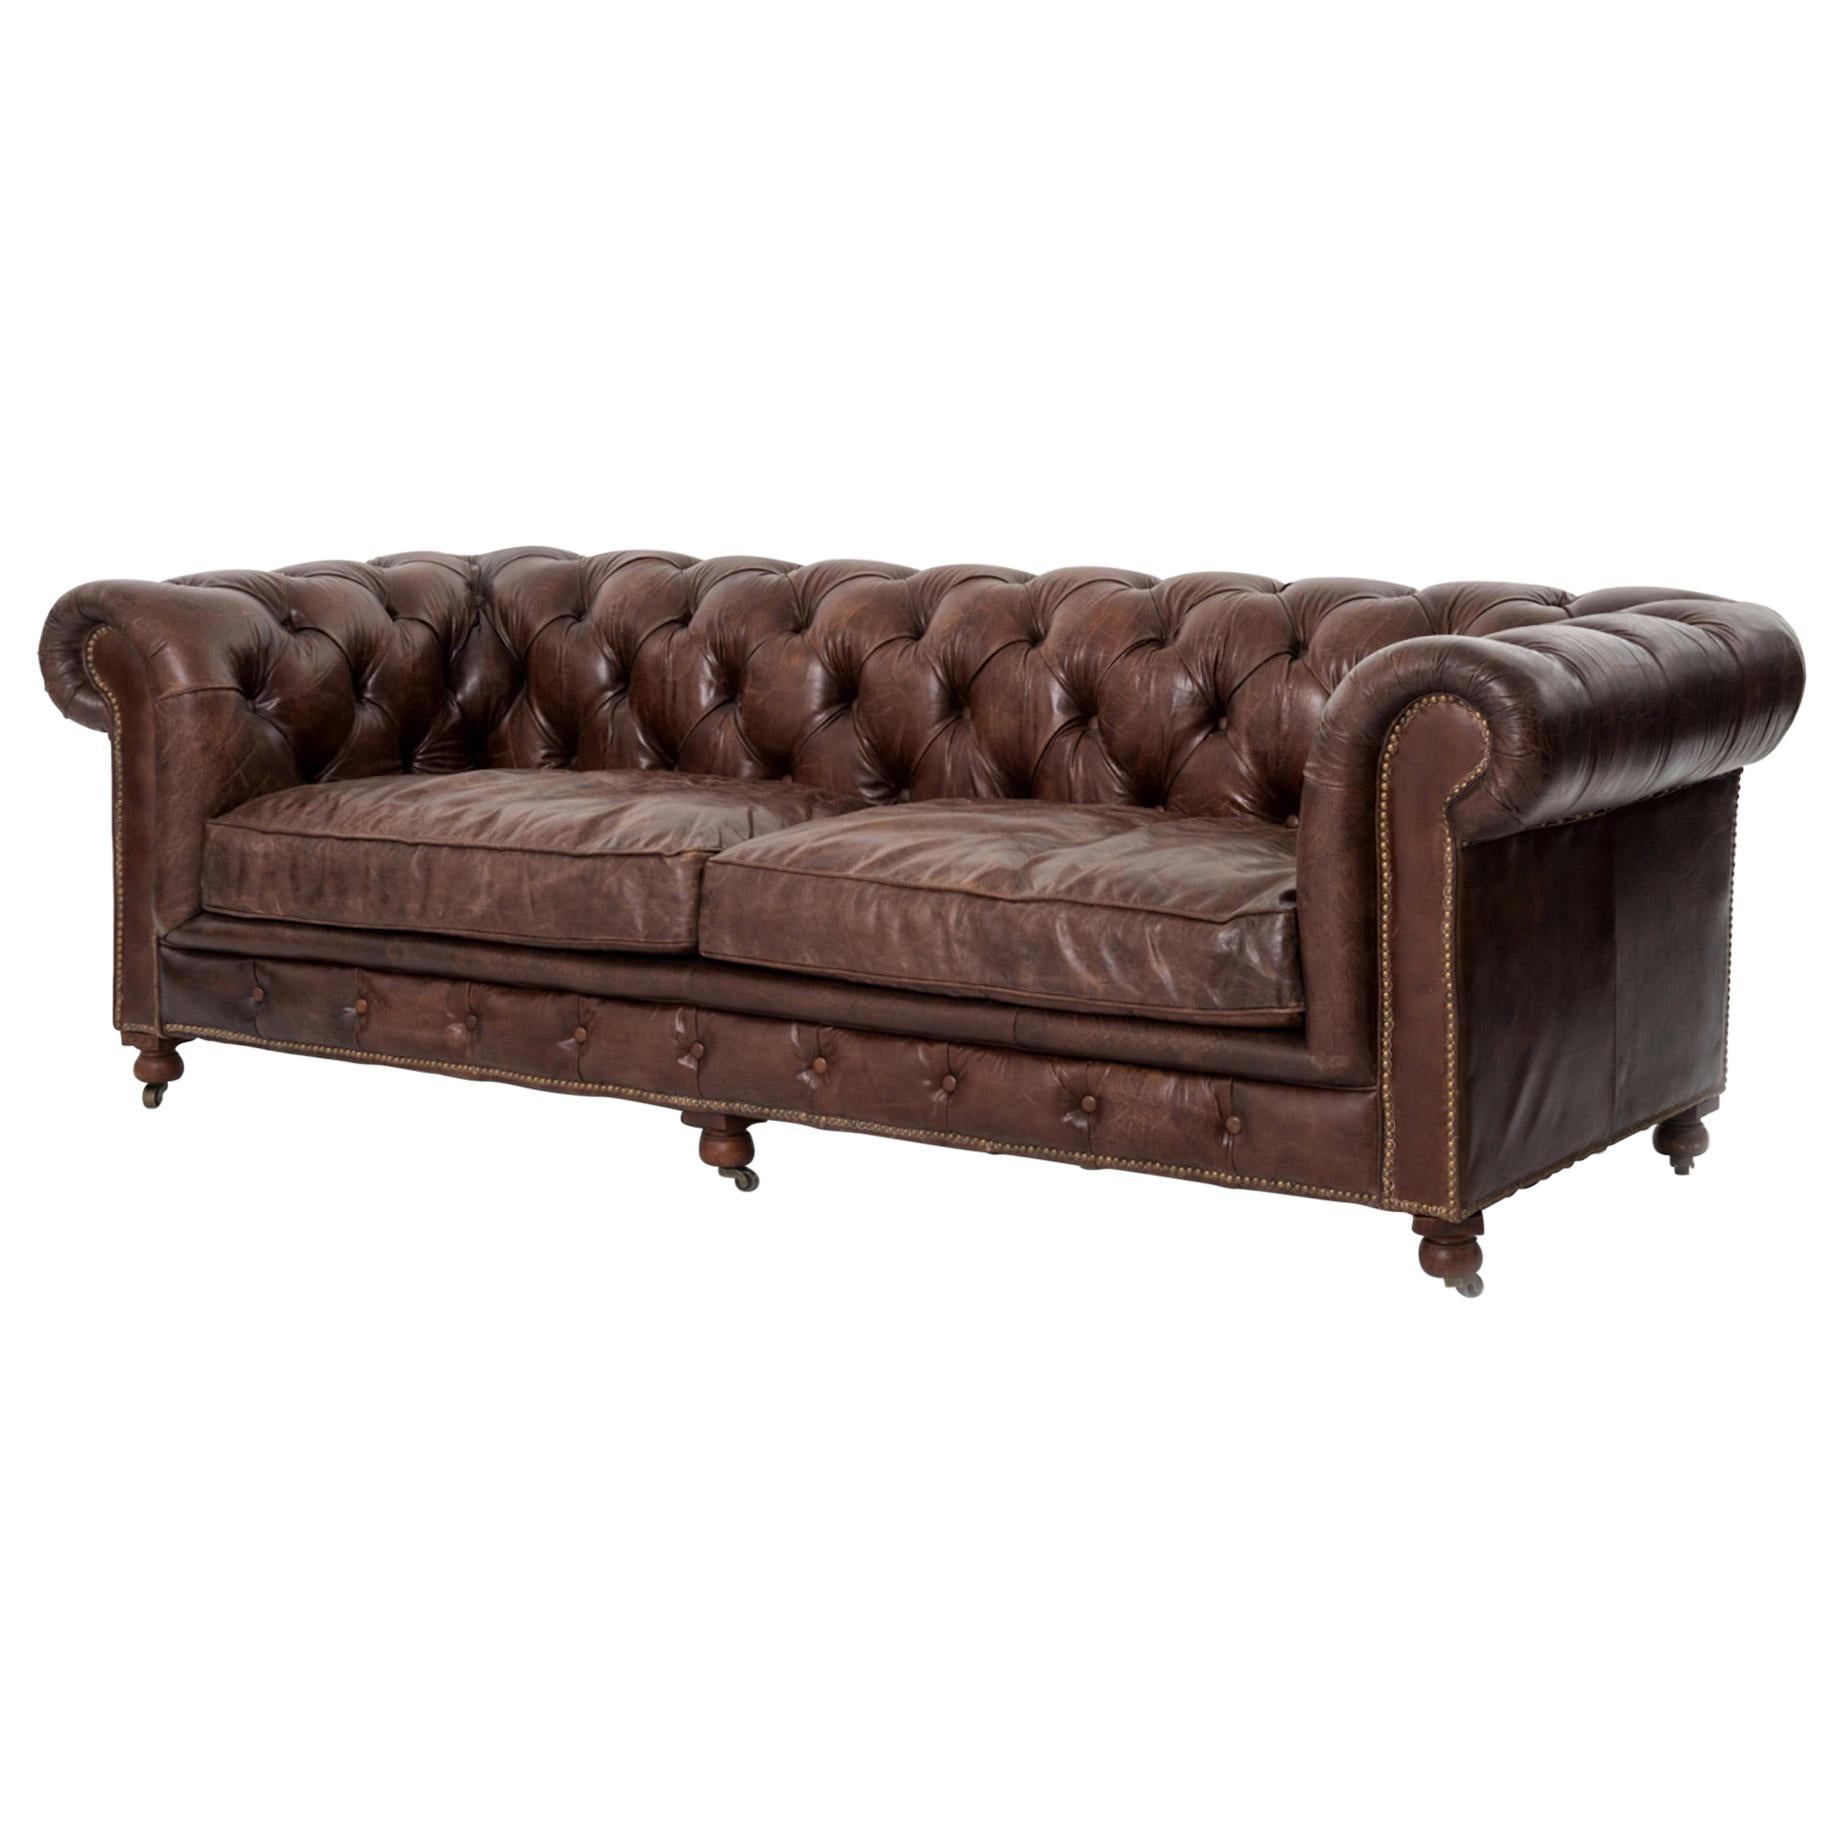 One Pair of Two-Seat Chesterfield Sofa's, Great Scale for Comfort, Great Patina